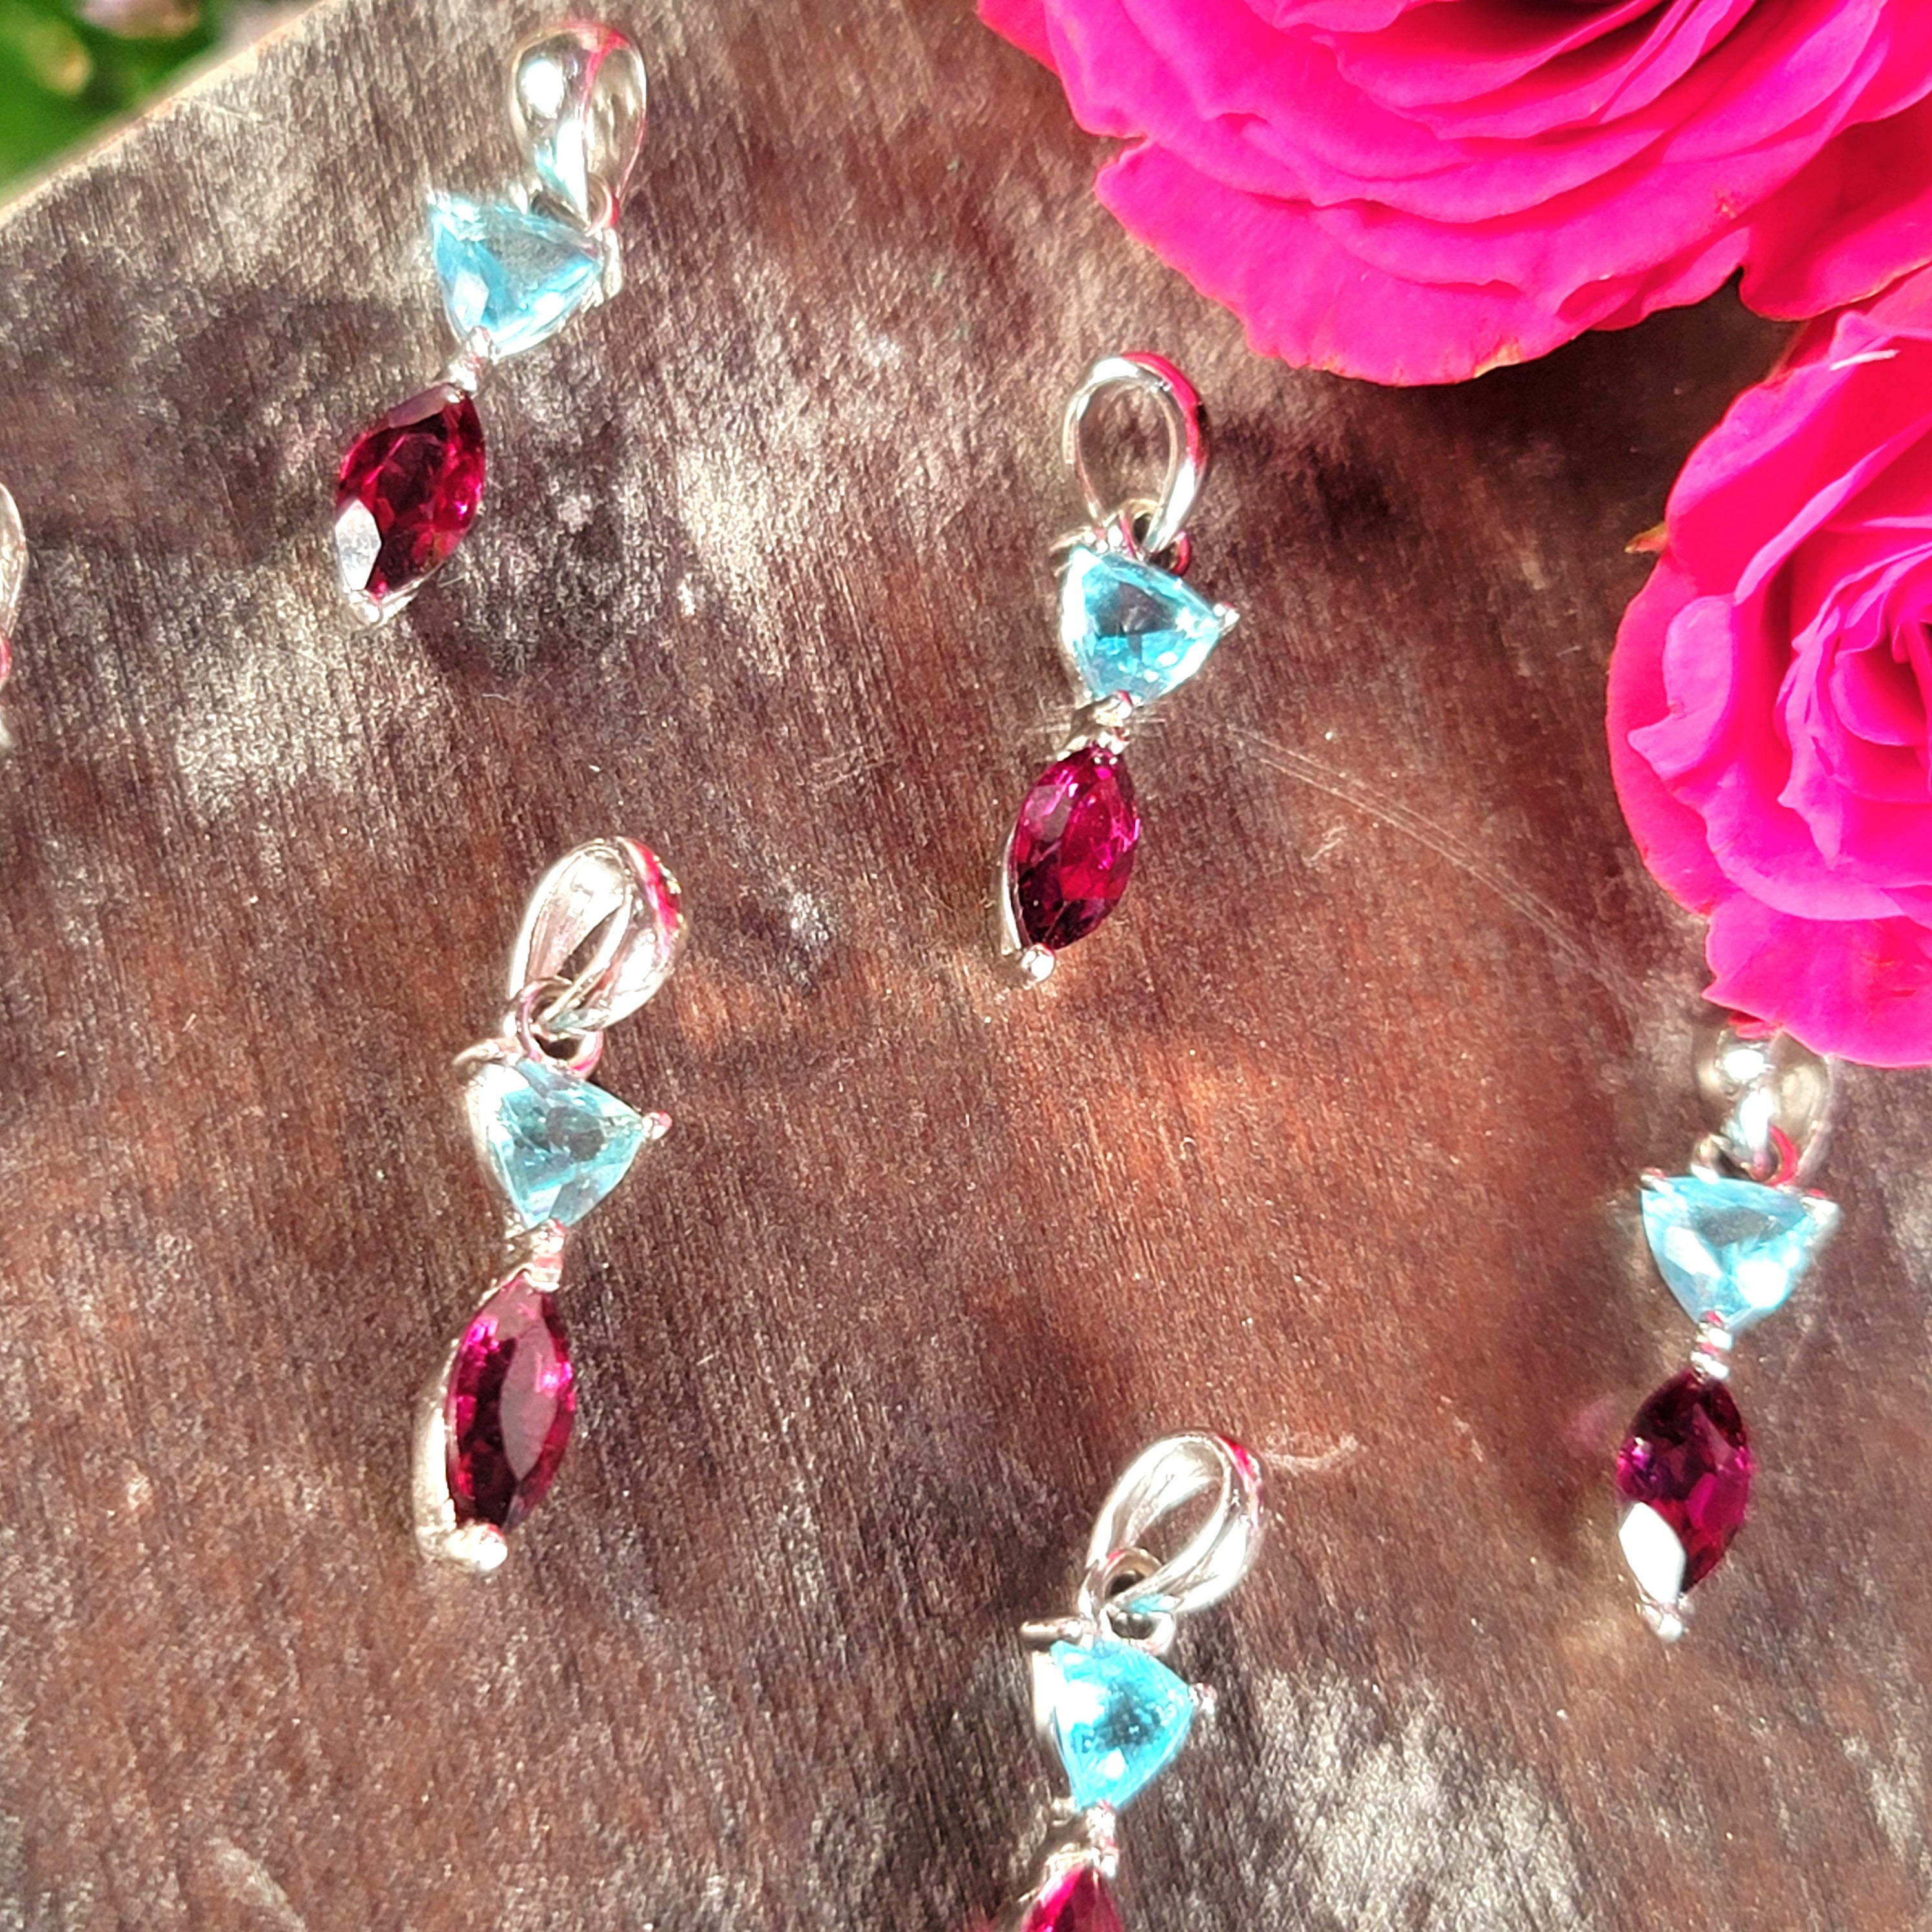 Gem Blue Apatite x Rhodolite Garnet Necklace for Connection, Healthy Weight Loss and Overall Wellness